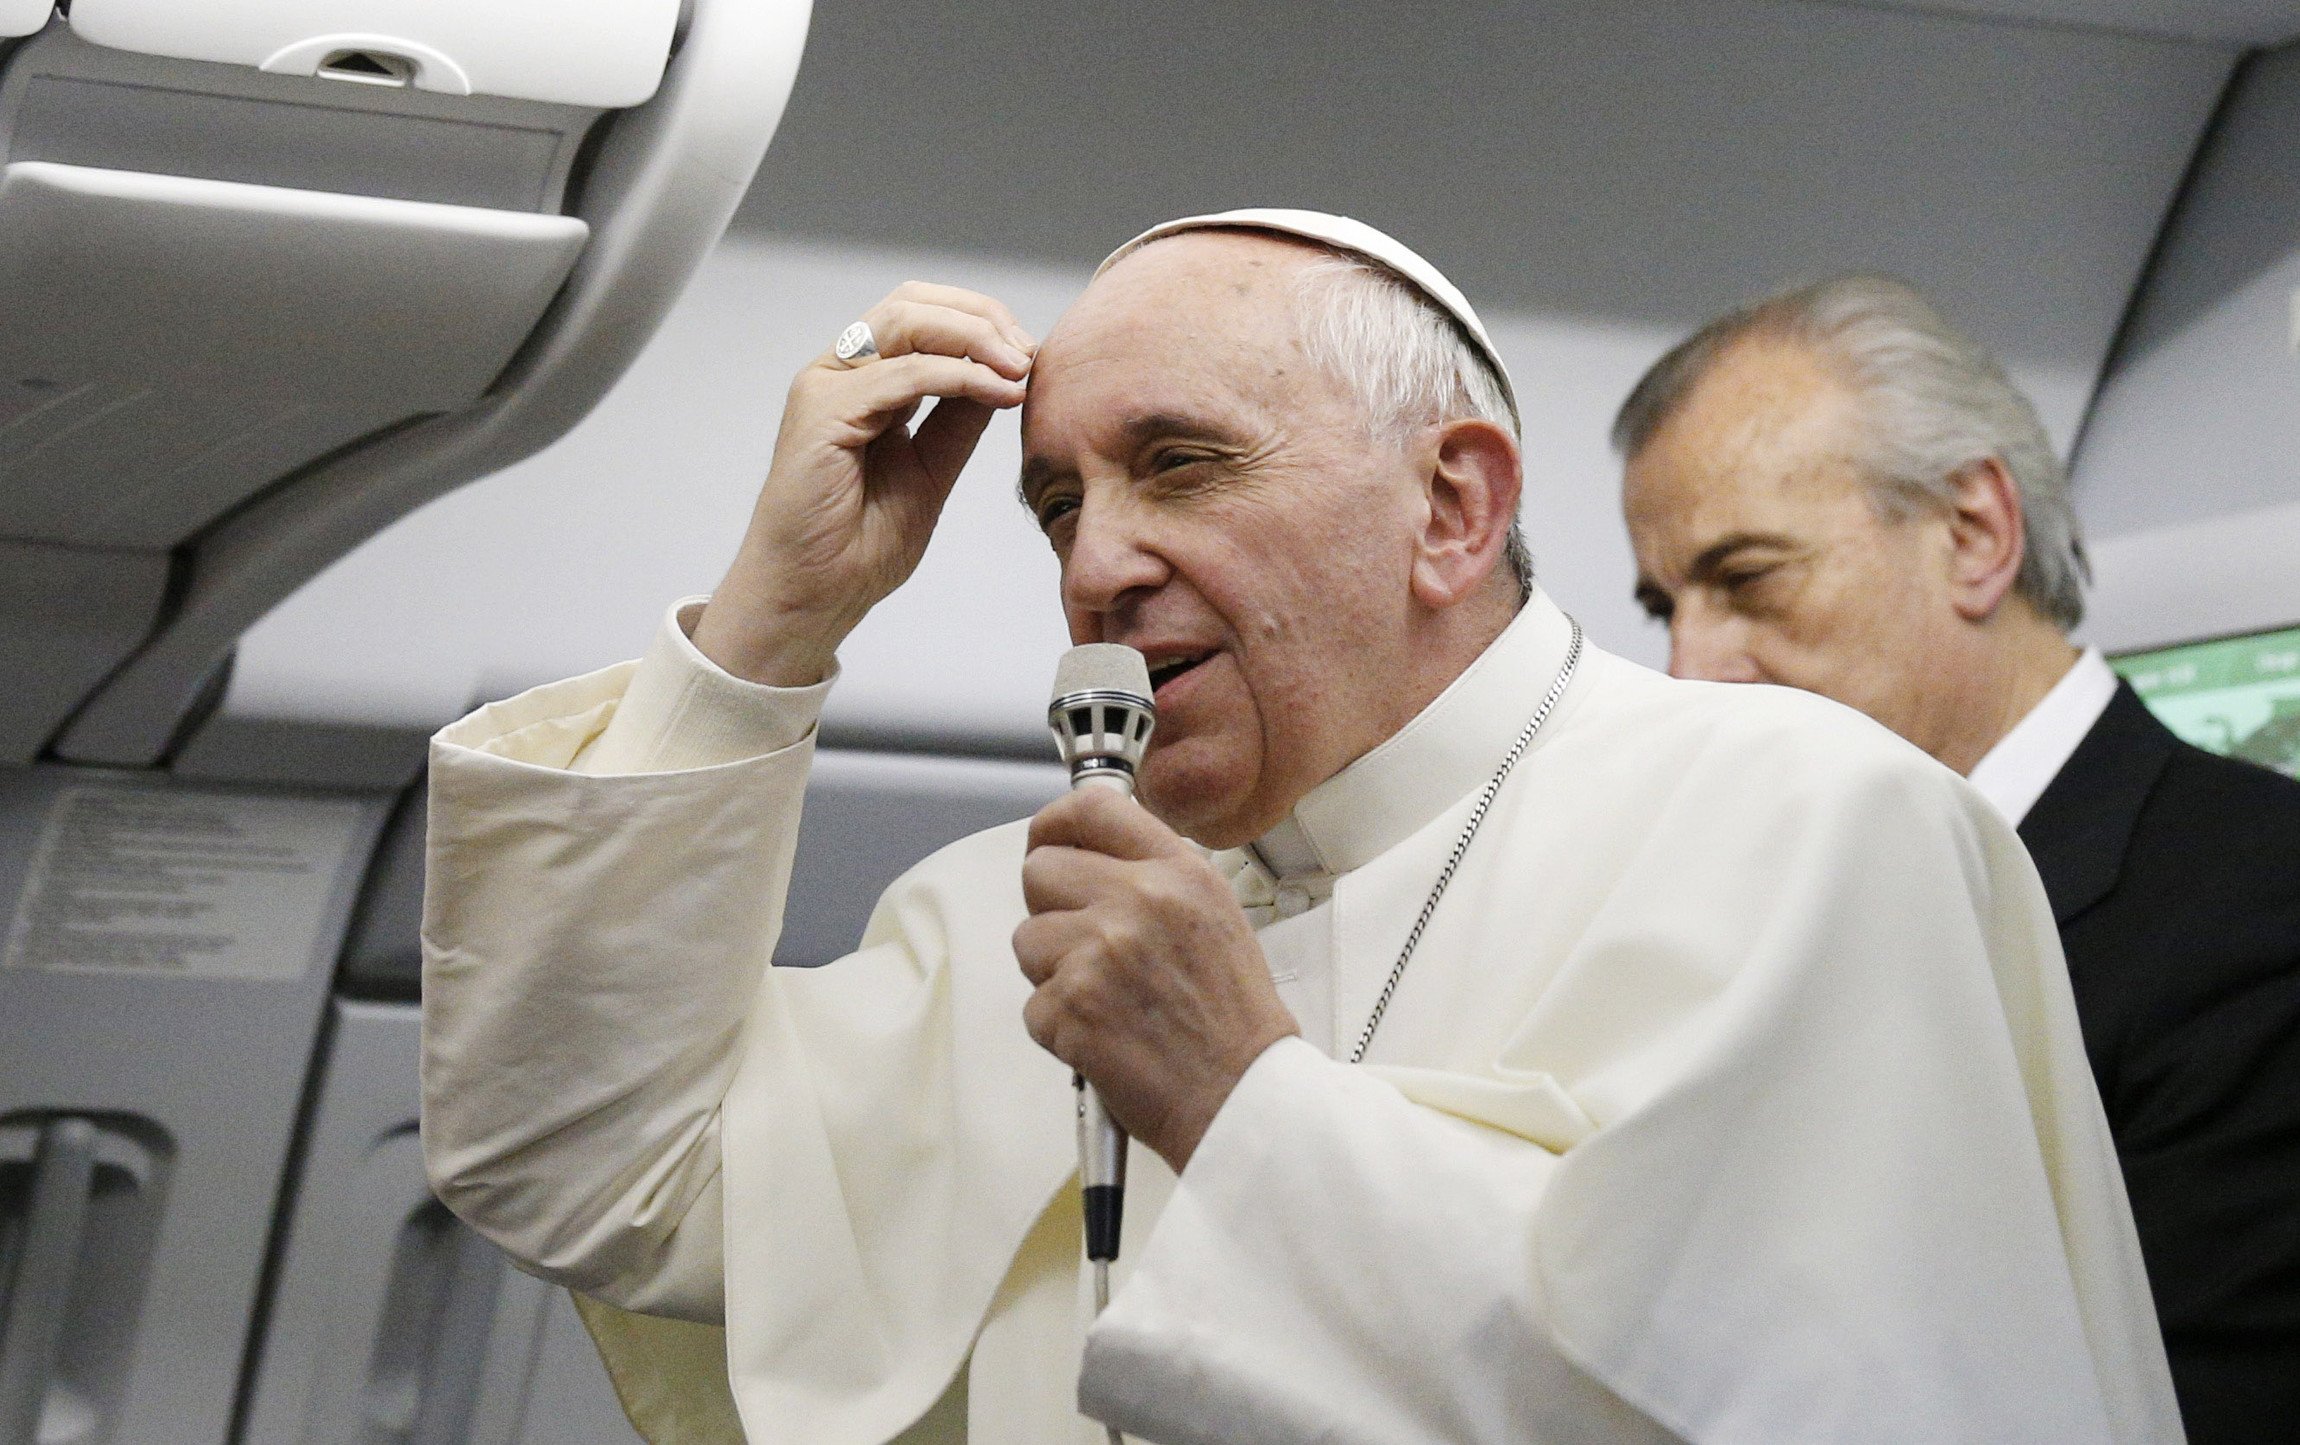 Pope Francis speaks to the media aboard the papal flight from Rio de Janeiro to Rome July 28, 2013. When the pope told reporters, "Who am I to judge" a homosexual person, he was emphasizing a part of Catholic teaching often overlooked by the media and misunderstood by many people. (CNS/Paul Haring)